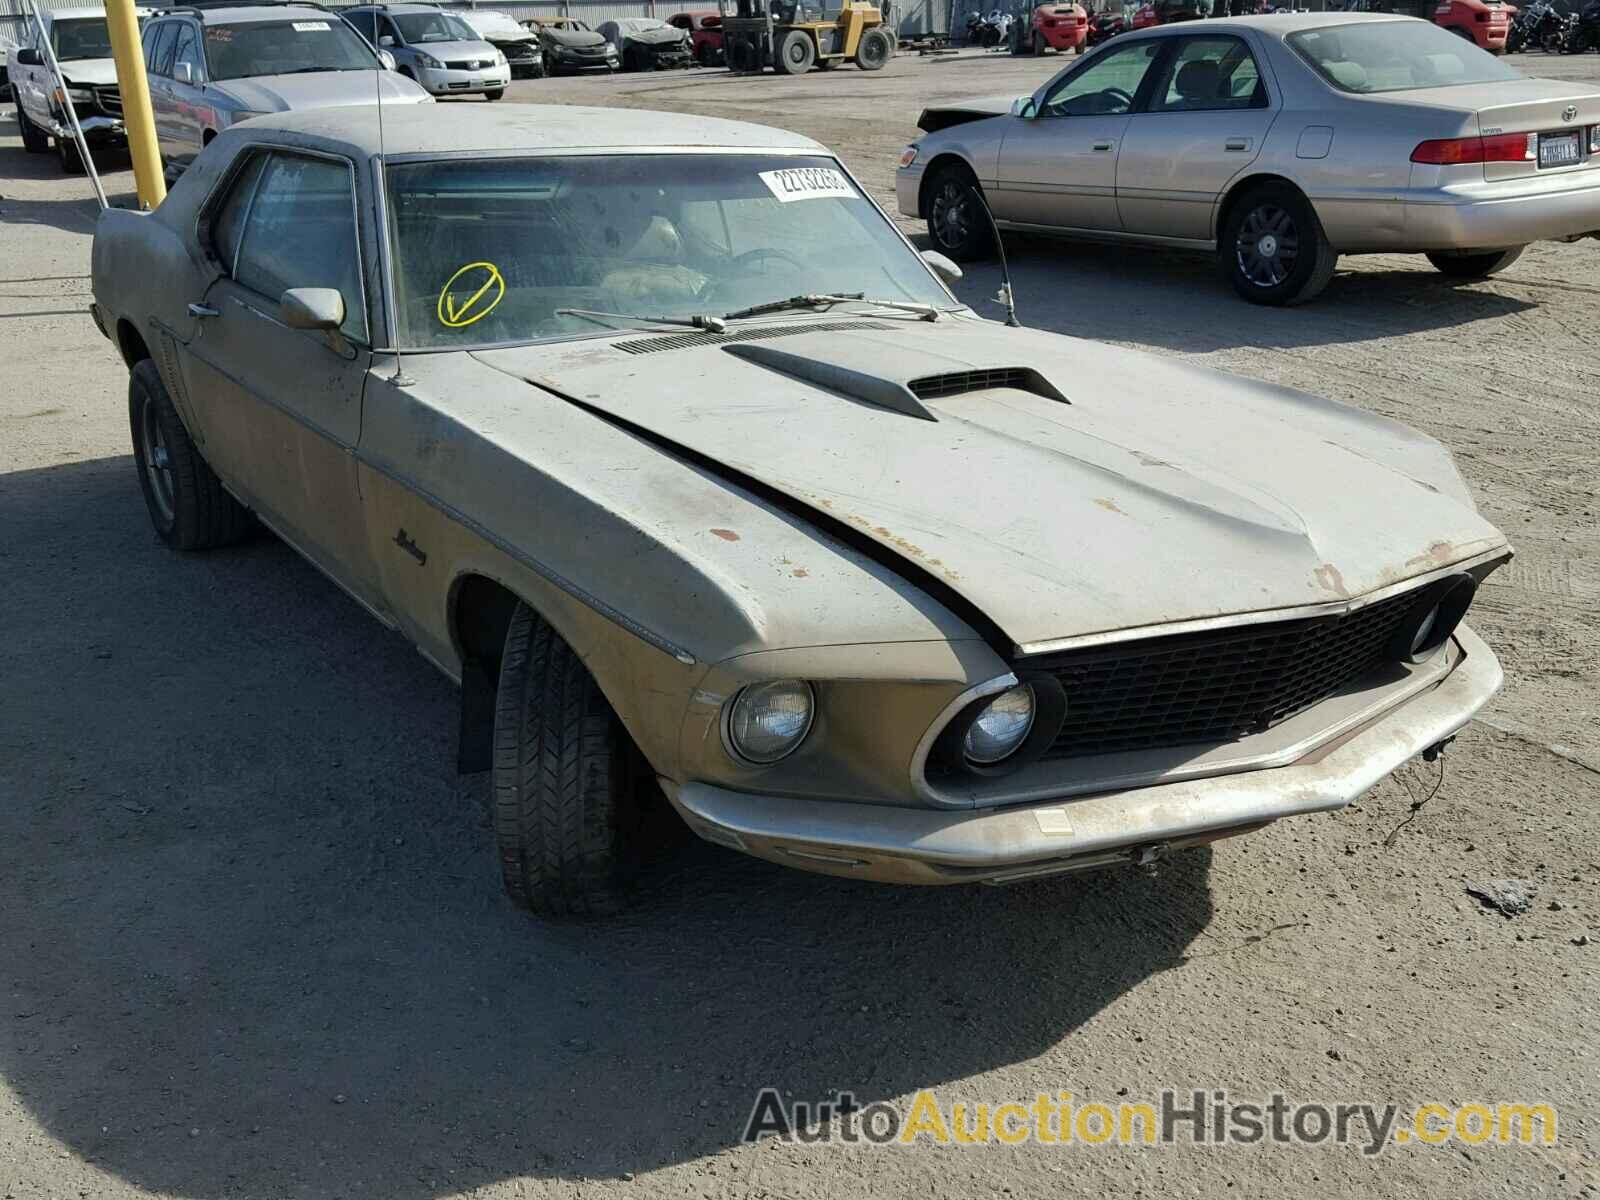 1969 FORD MUSTANG, 9F01F213338